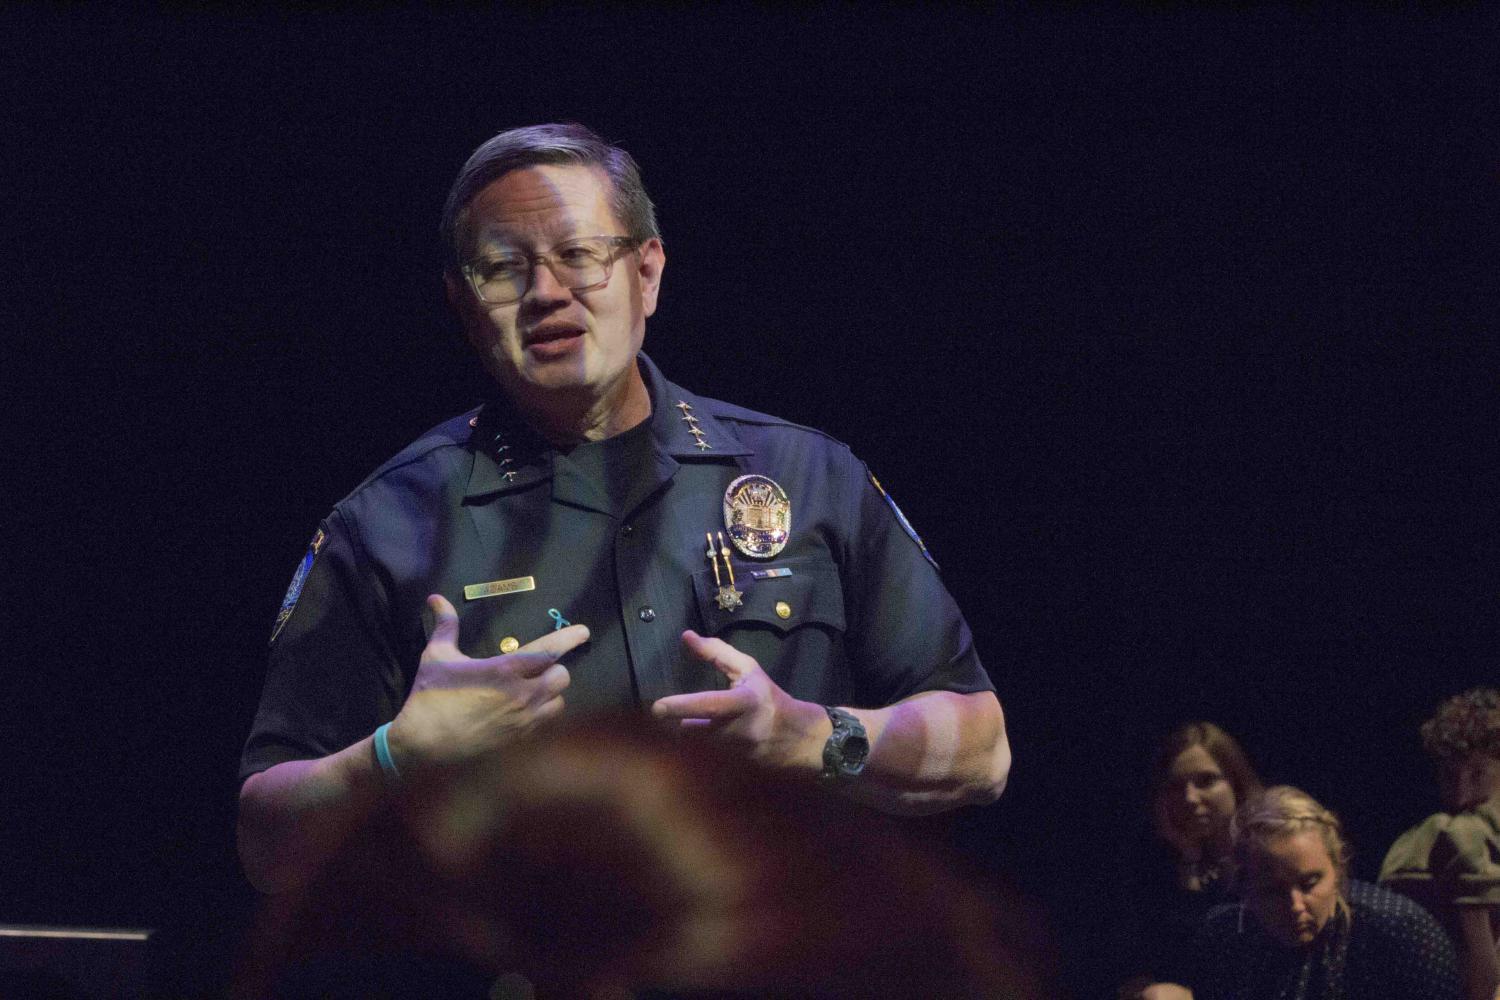  Chief Johnnie Adams from the Santa Monica Police, at the Q&amp;A panel talk after the performance. Present to talk about Title IX and sexual assaults. Voices of Hope, play by Pamela Lassiter Cathey about sexual assault and its consequences for the v